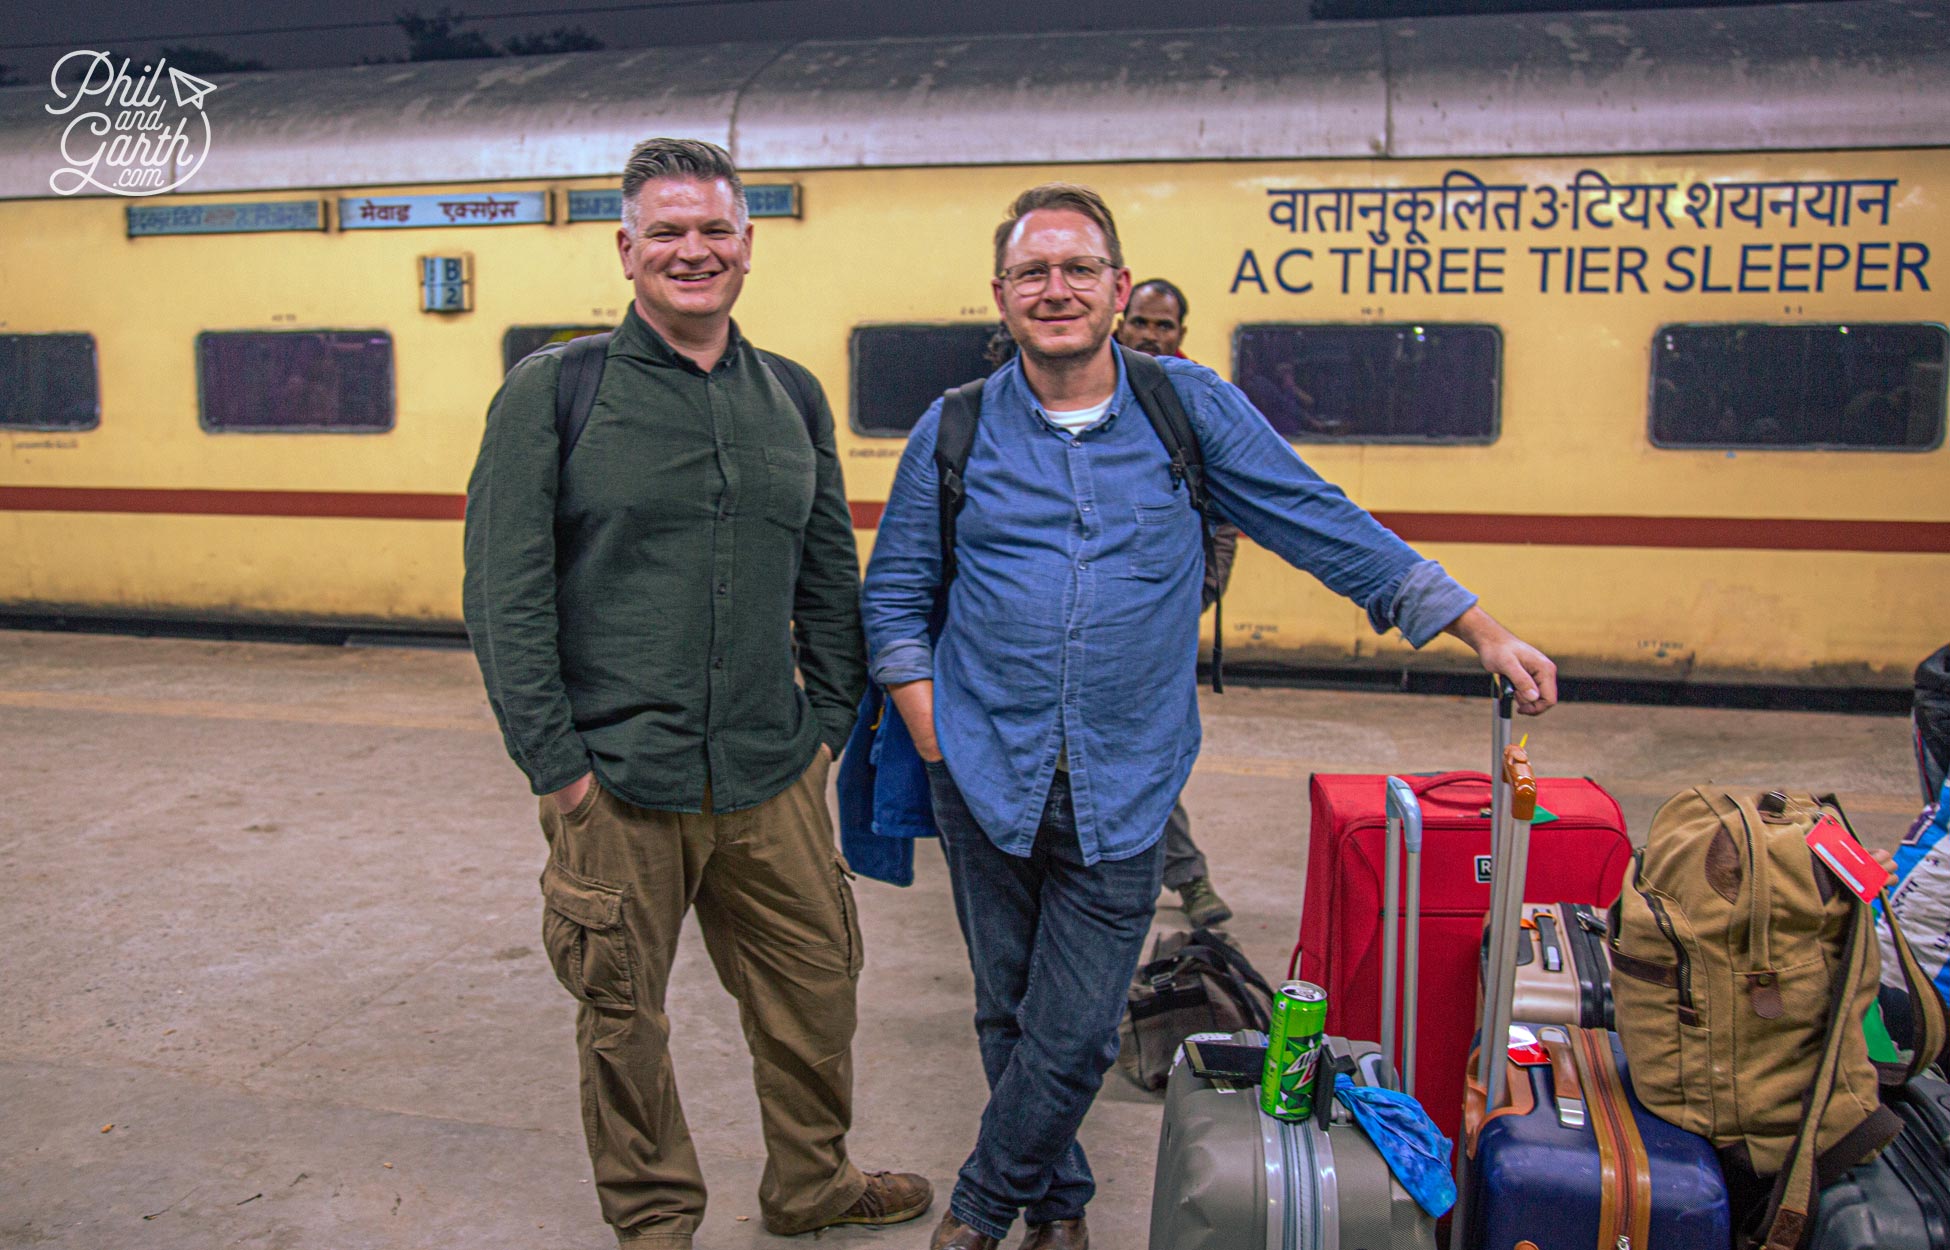 Survival Guide To Indian Railways Sleeper Trains - Phil and Garth